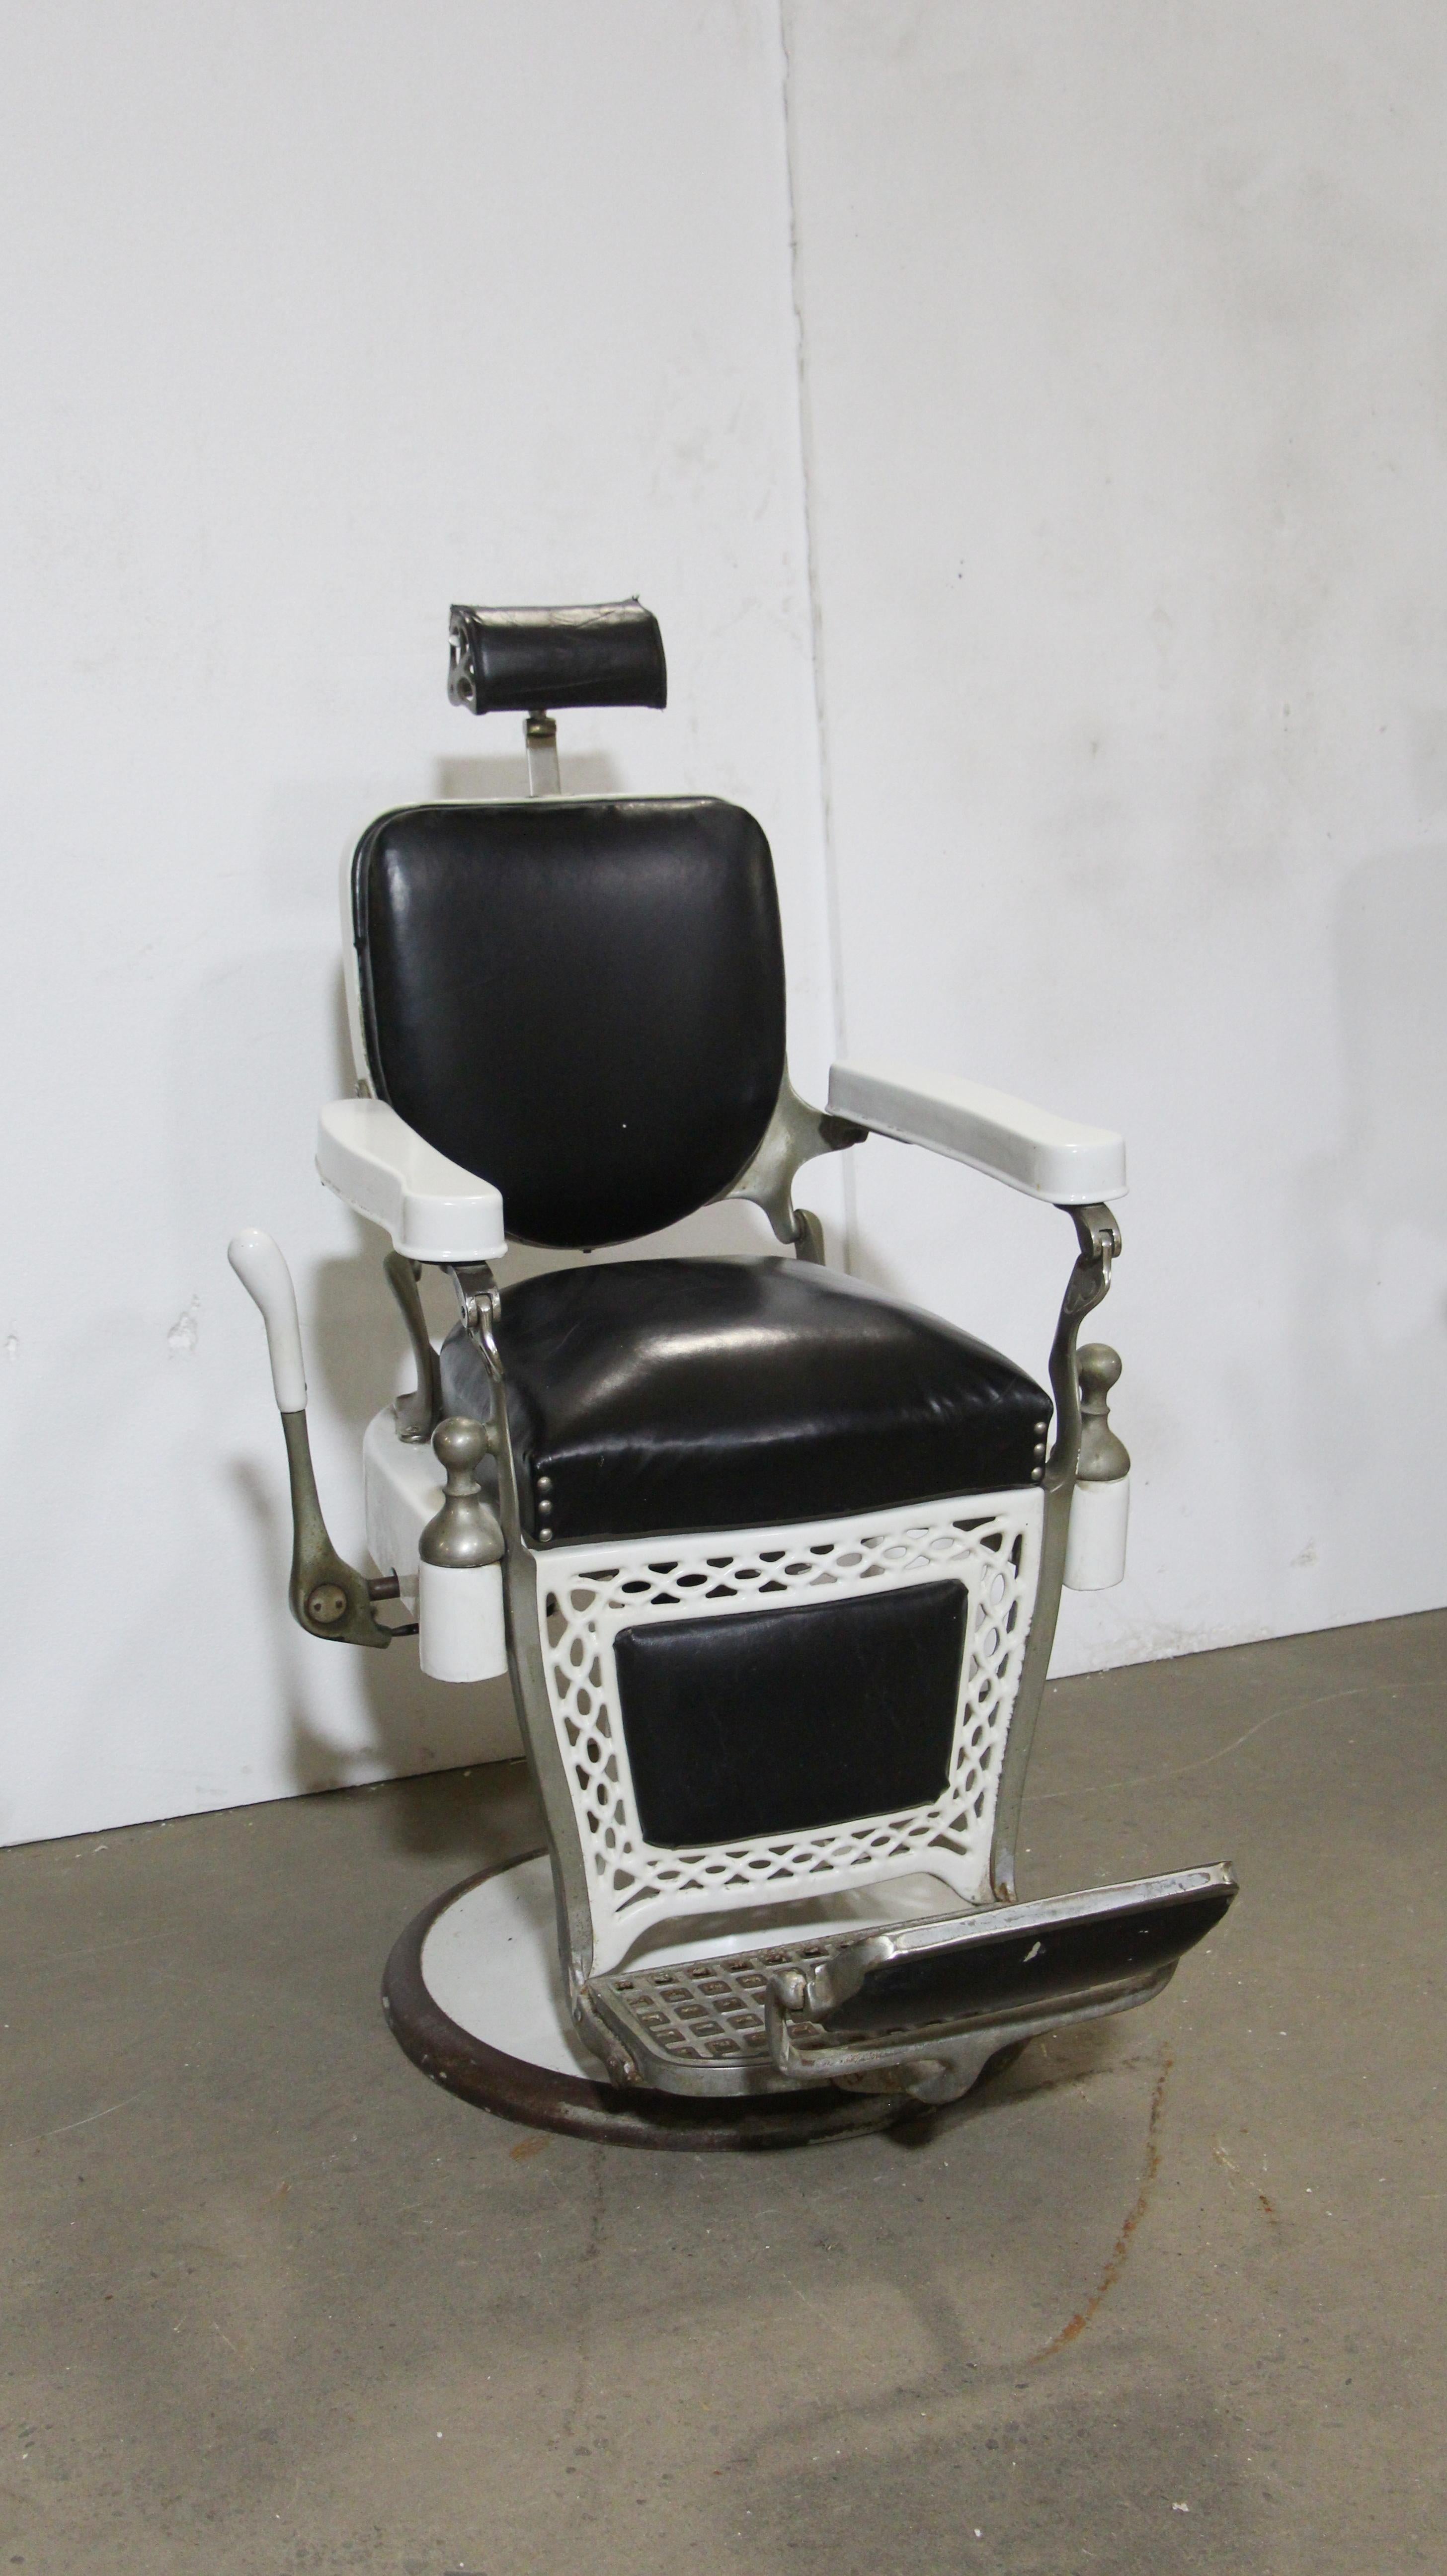 Original 1930s Paider barber chair done in white porcelain and black leather upholstery. This can be seen at our 400 Gilligan St location in Scranton, PA.